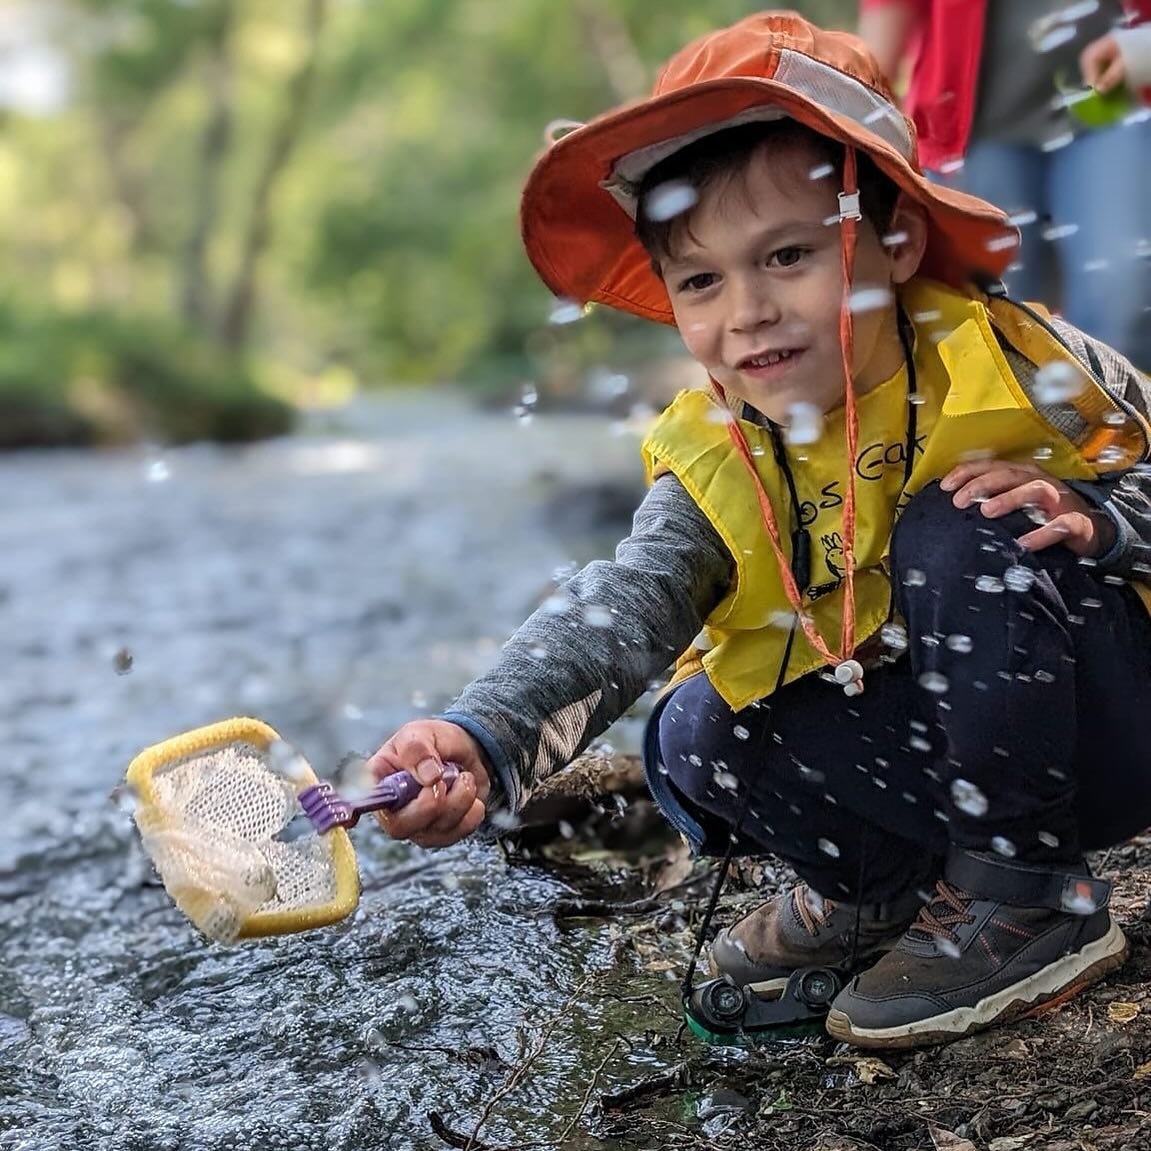 🌿 Our little explorers had a blast at Adventure Day by the creek. Off campus and into nature, they delved into a world of discovery, exploring the wonders of the great outdoors. 

From spotting wildlife to splashing in the creek, every moment was fi